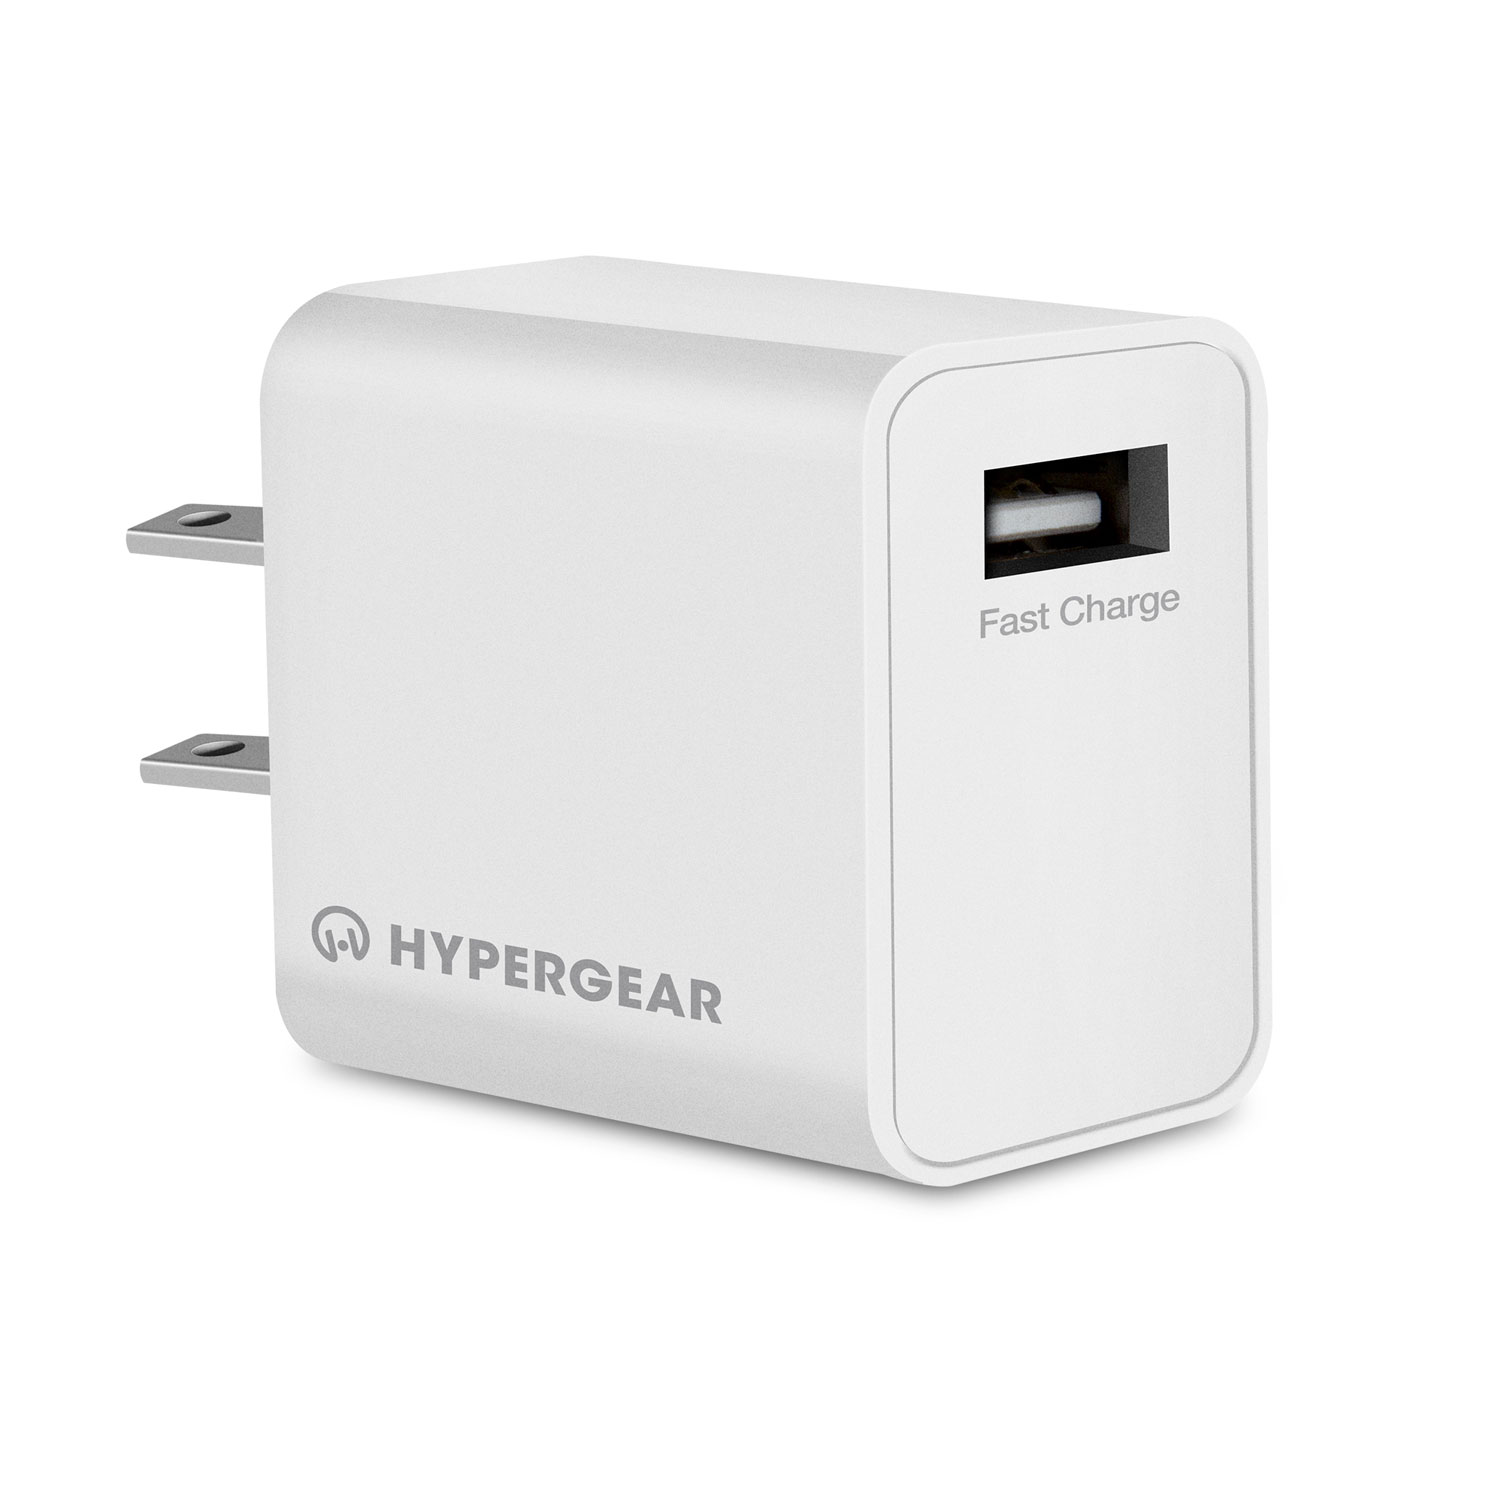 HyperGear Single USB Fast Charge Wall Charger